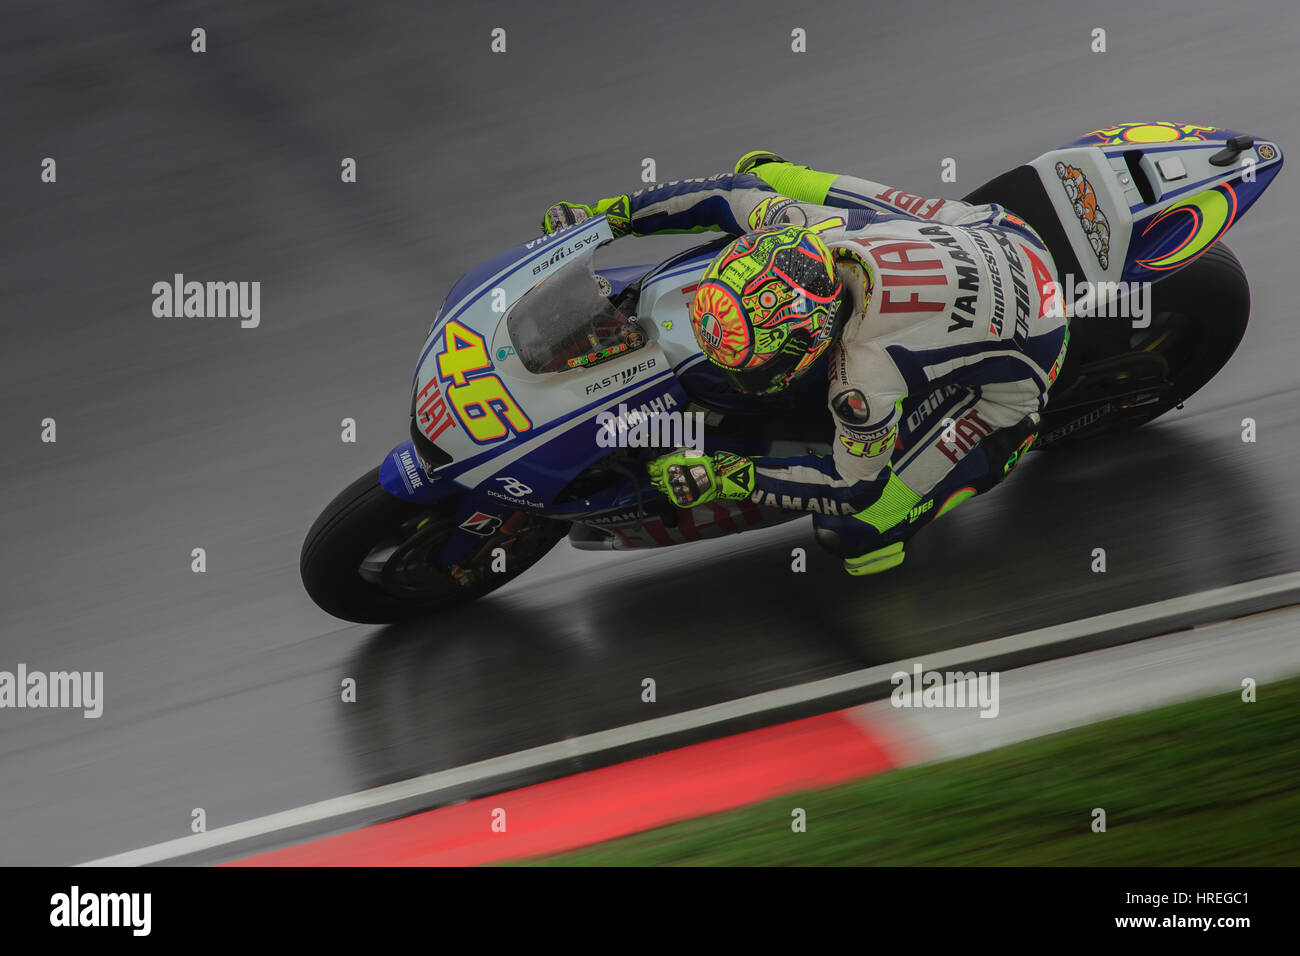 Valentino Rossi is a 9-time World Champion during the race in Sepang International Circuits. Stock Photo